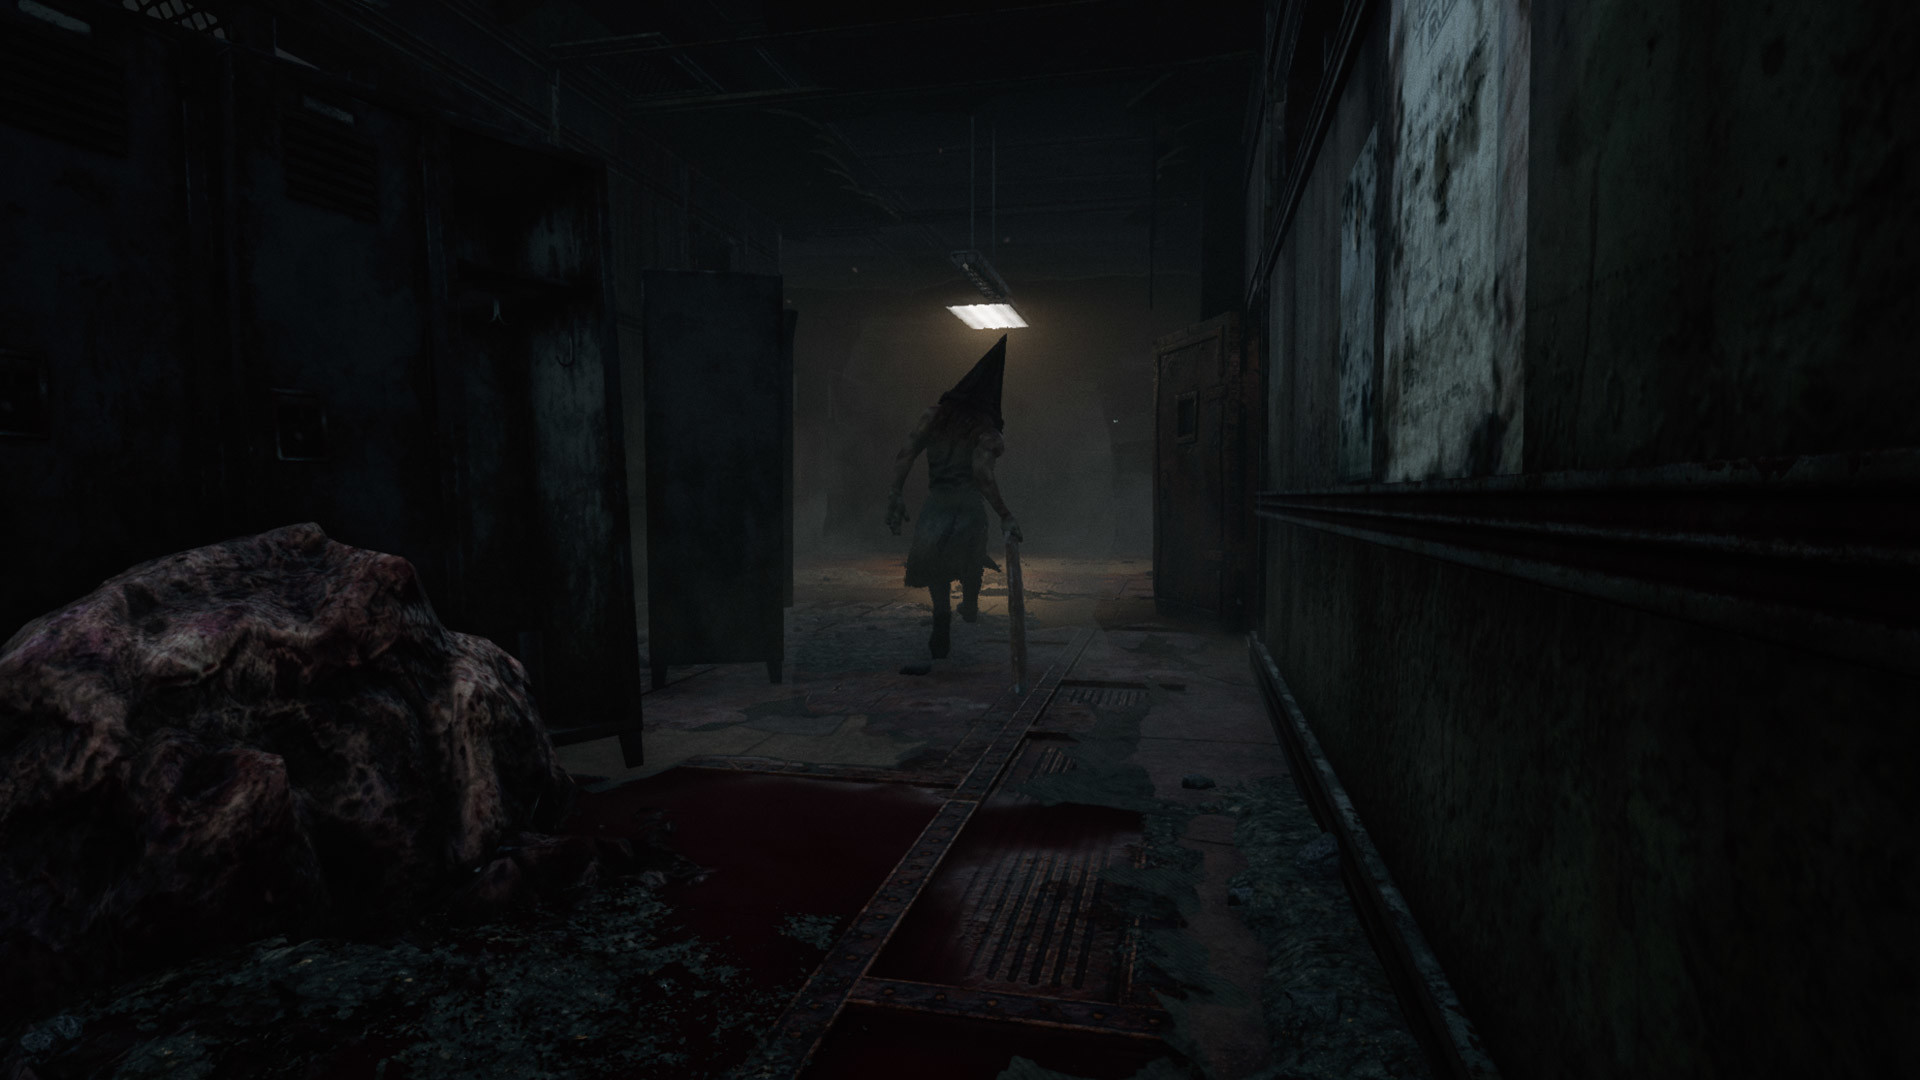 Pyramid Head Comes To Dead By Daylight And Konami Drops Several Silent Hill Soundtracks Onto Spotify To Celebrate